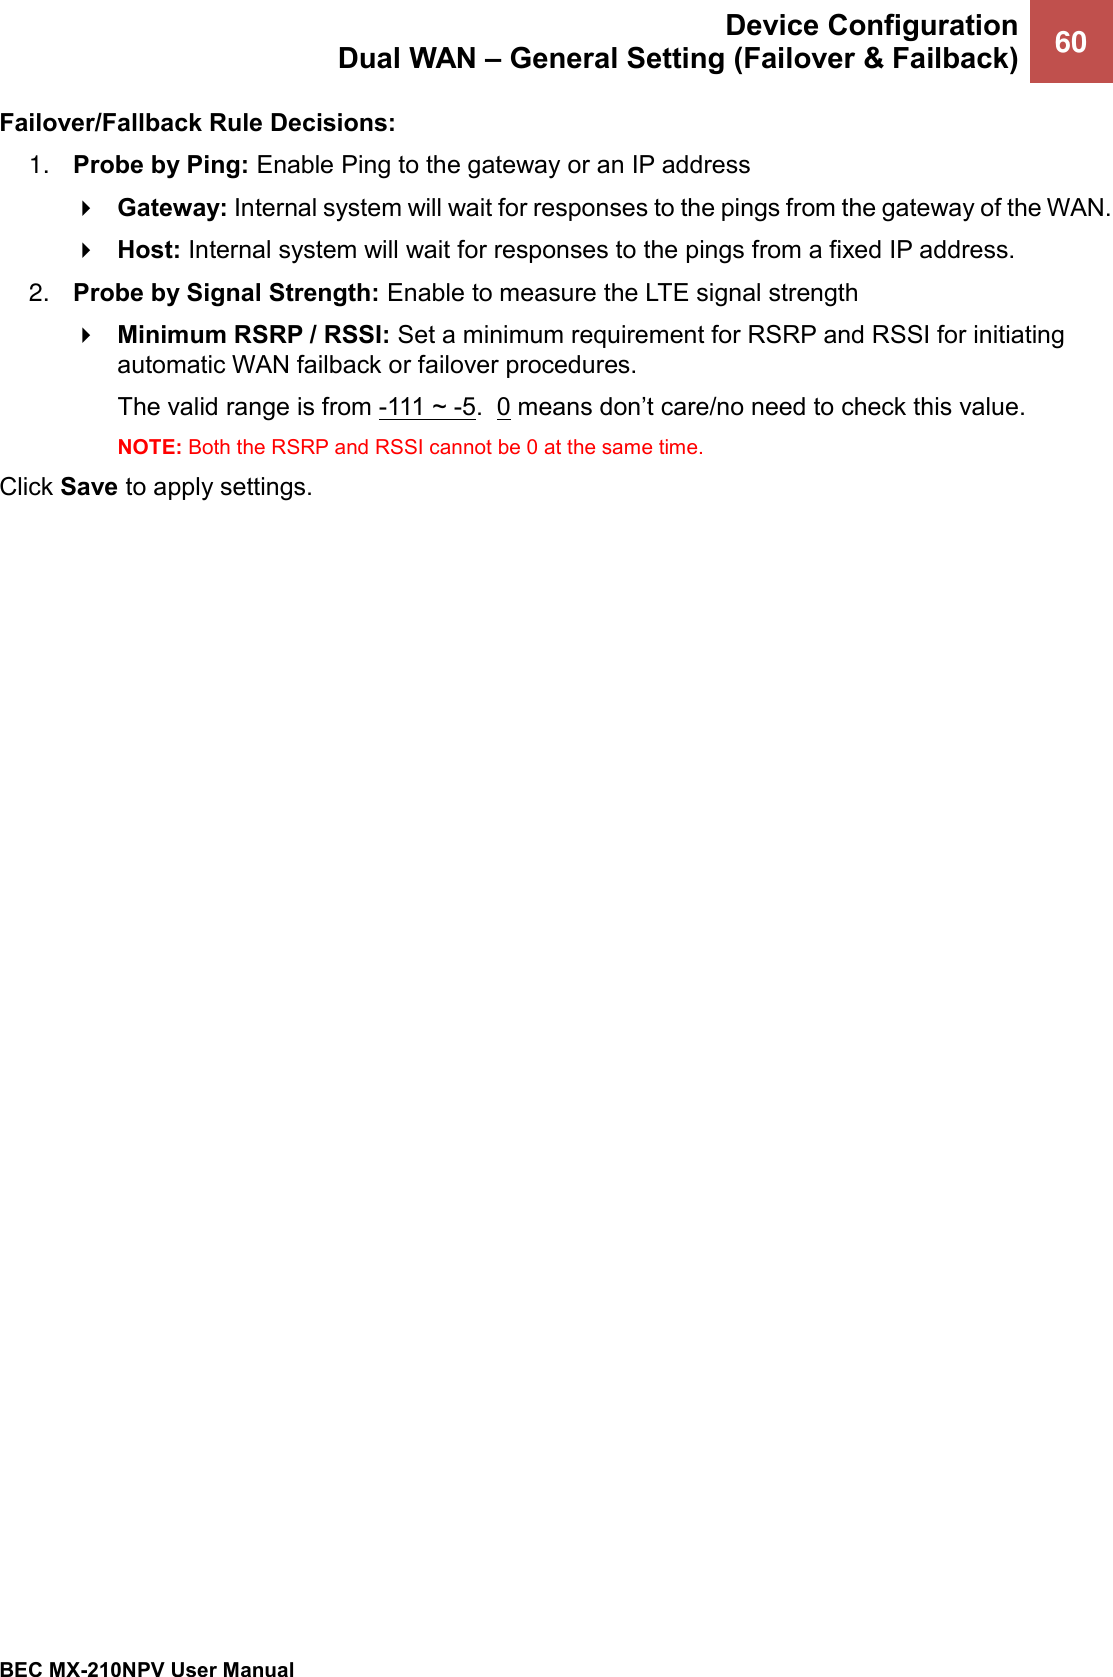  Device Configuration Dual WAN – General Setting (Failover &amp; Failback) 60   BEC MX-210NPV User Manual  Failover/Fallback Rule Decisions: 1. Probe by Ping: Enable Ping to the gateway or an IP address  Gateway: Internal system will wait for responses to the pings from the gateway of the WAN.  Host: Internal system will wait for responses to the pings from a fixed IP address. 2. Probe by Signal Strength: Enable to measure the LTE signal strength  Minimum RSRP / RSSI: Set a minimum requirement for RSRP and RSSI for initiating automatic WAN failback or failover procedures.  The valid range is from -111 ~ -5.  0 means don’t care/no need to check this value. NOTE: Both the RSRP and RSSI cannot be 0 at the same time.   Click Save to apply settings.   